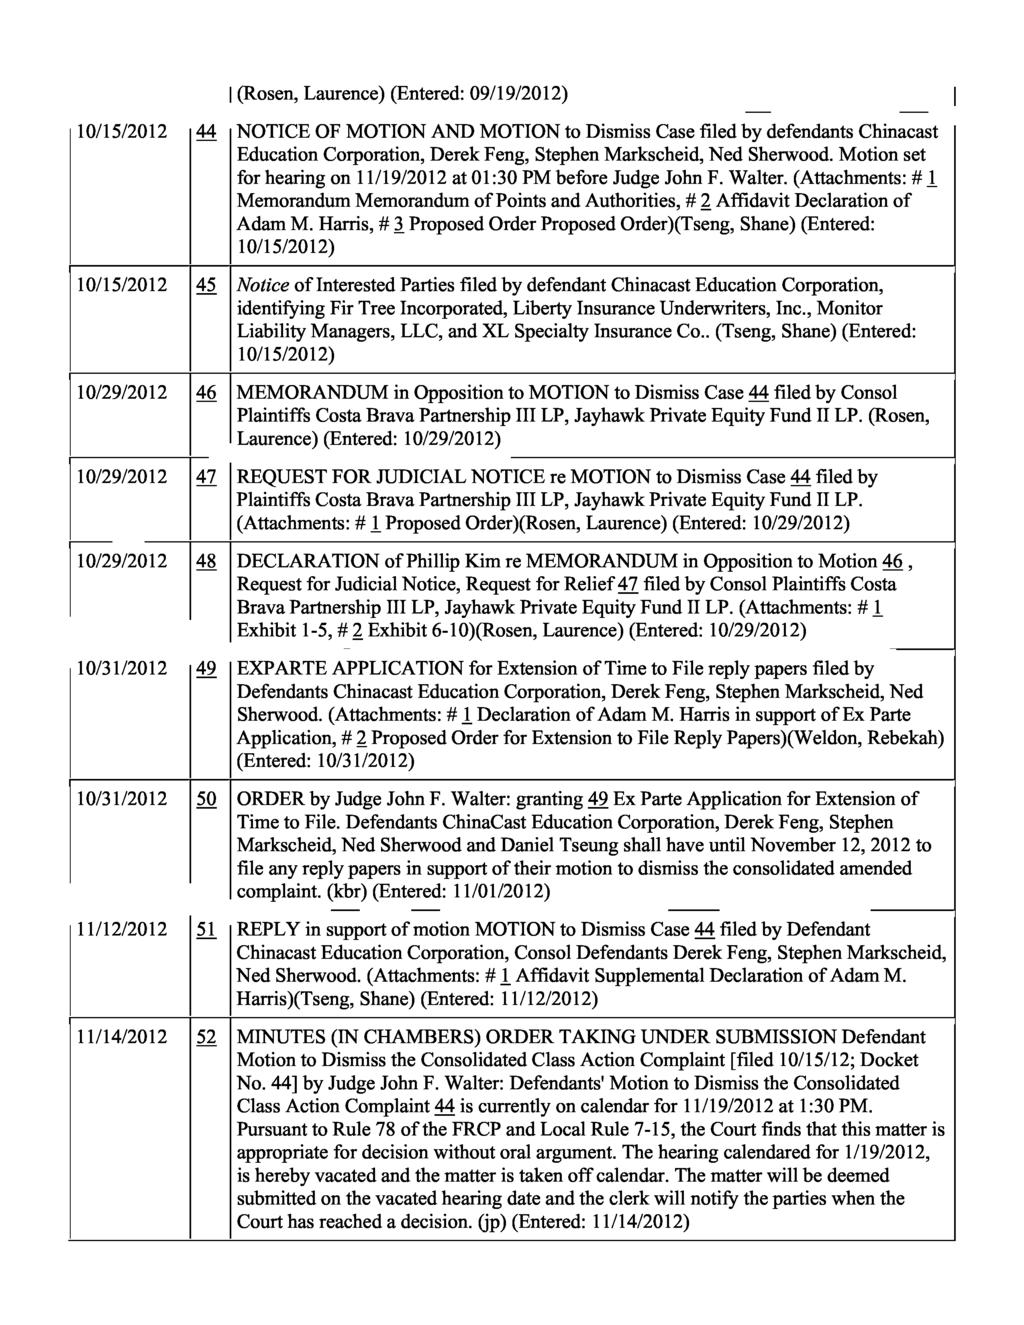 I (Rosen, Laurence) (Entered: 09/19/2012) 10/15/2012 44 NOTICE OF MOTION AND MOTION to Dismiss Case filed by defendants Chinacast Education Corporation, Derek Feng, Stephen Markscheid, Ned Sherwood.